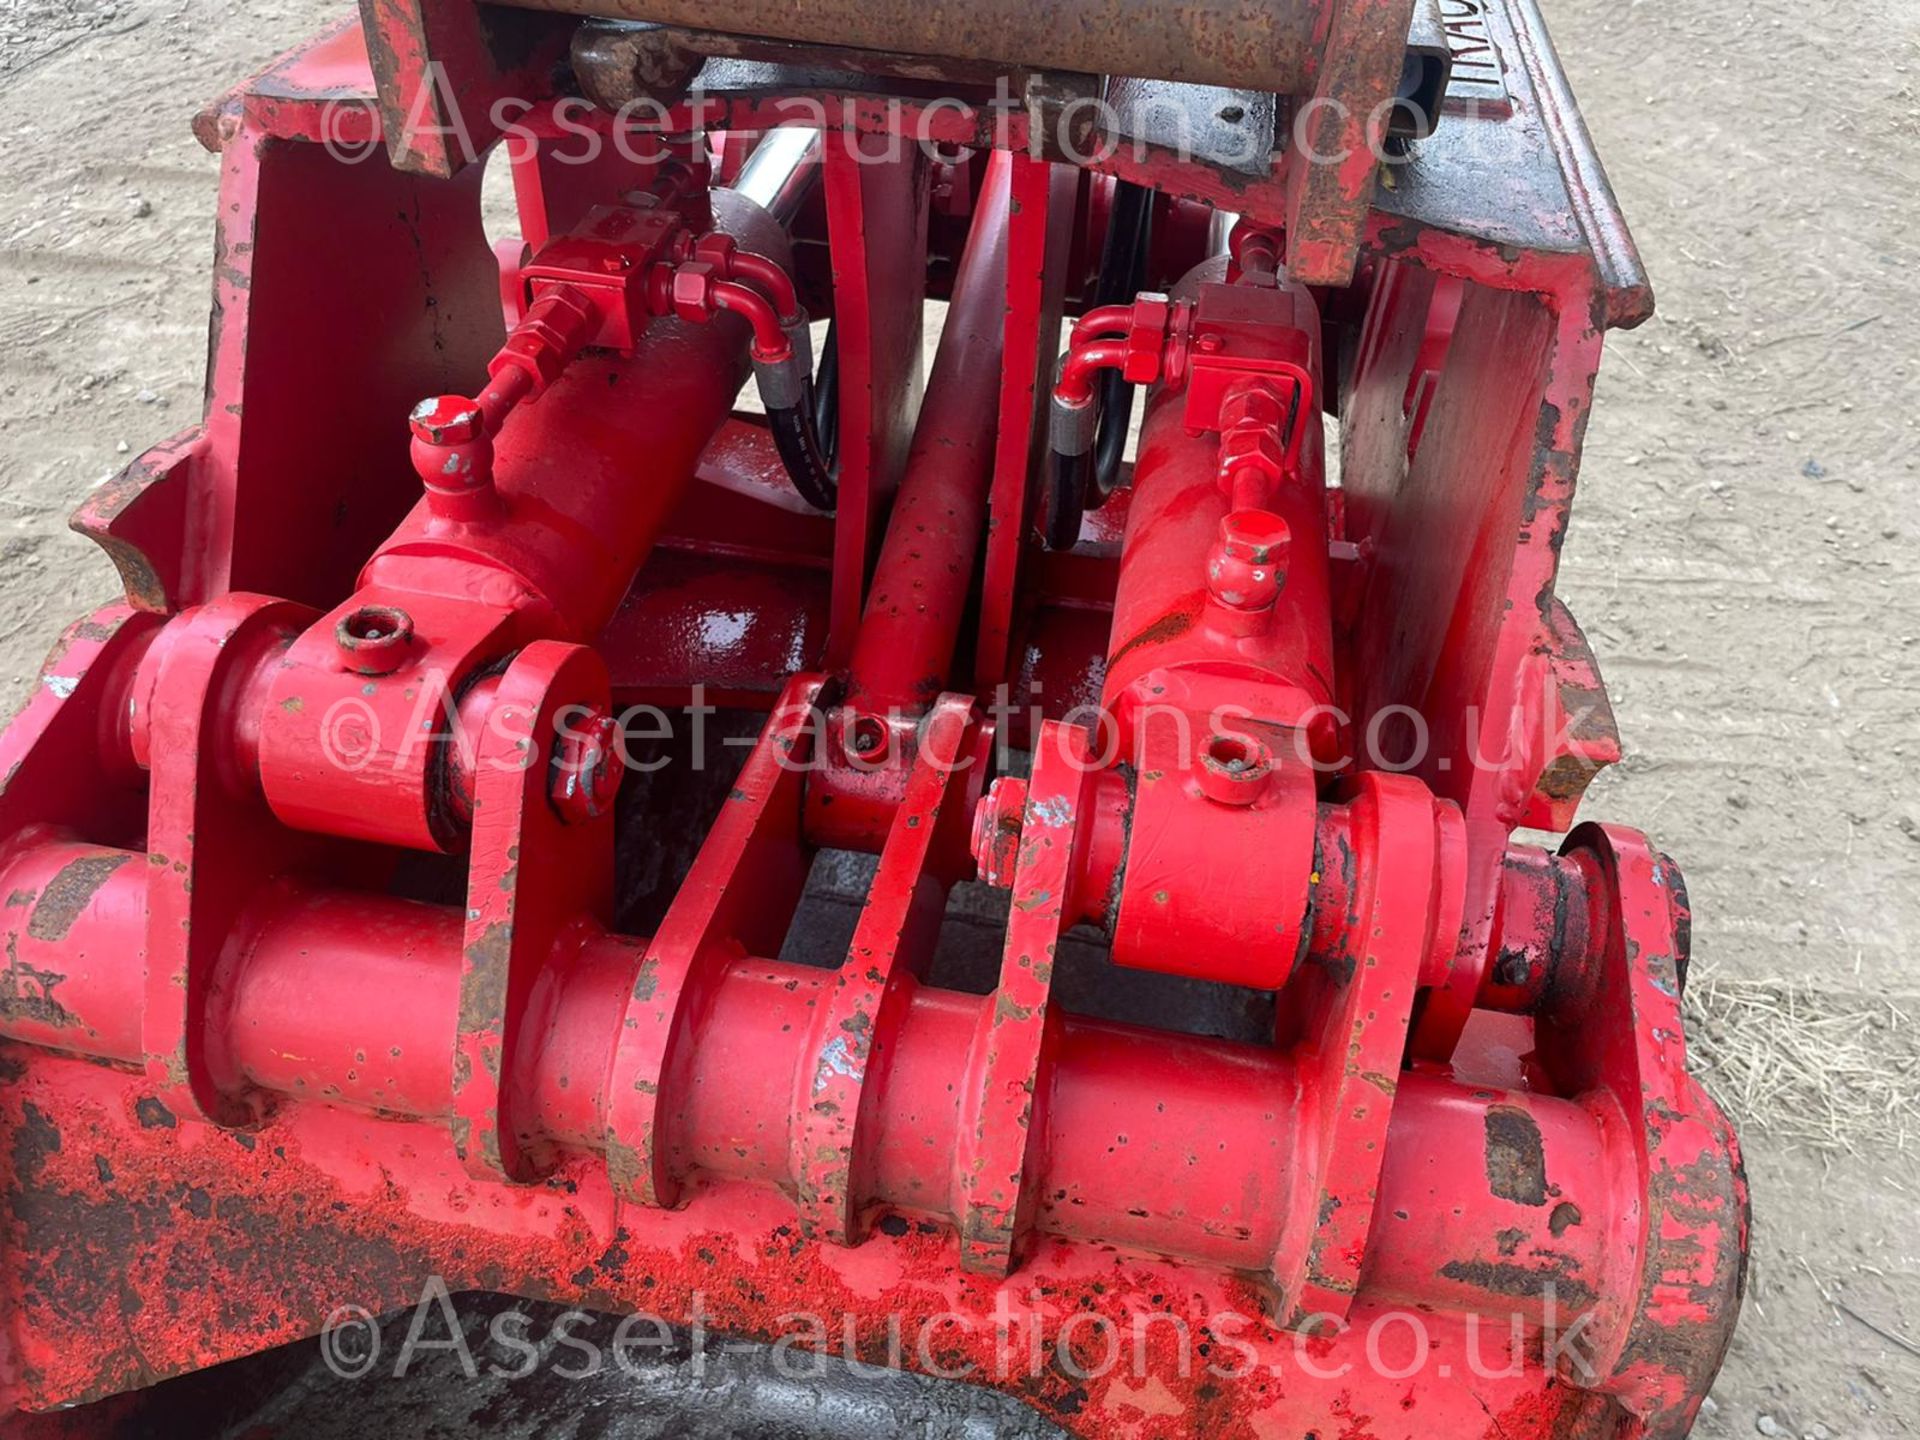 HYDRAULIC RED SHELL GRAB, SUITABLE FOR A LARGE EXCAVATOR, HYDRAULIC DRIVEN, 65mm PINS *PLUS VAT* - Image 11 of 16